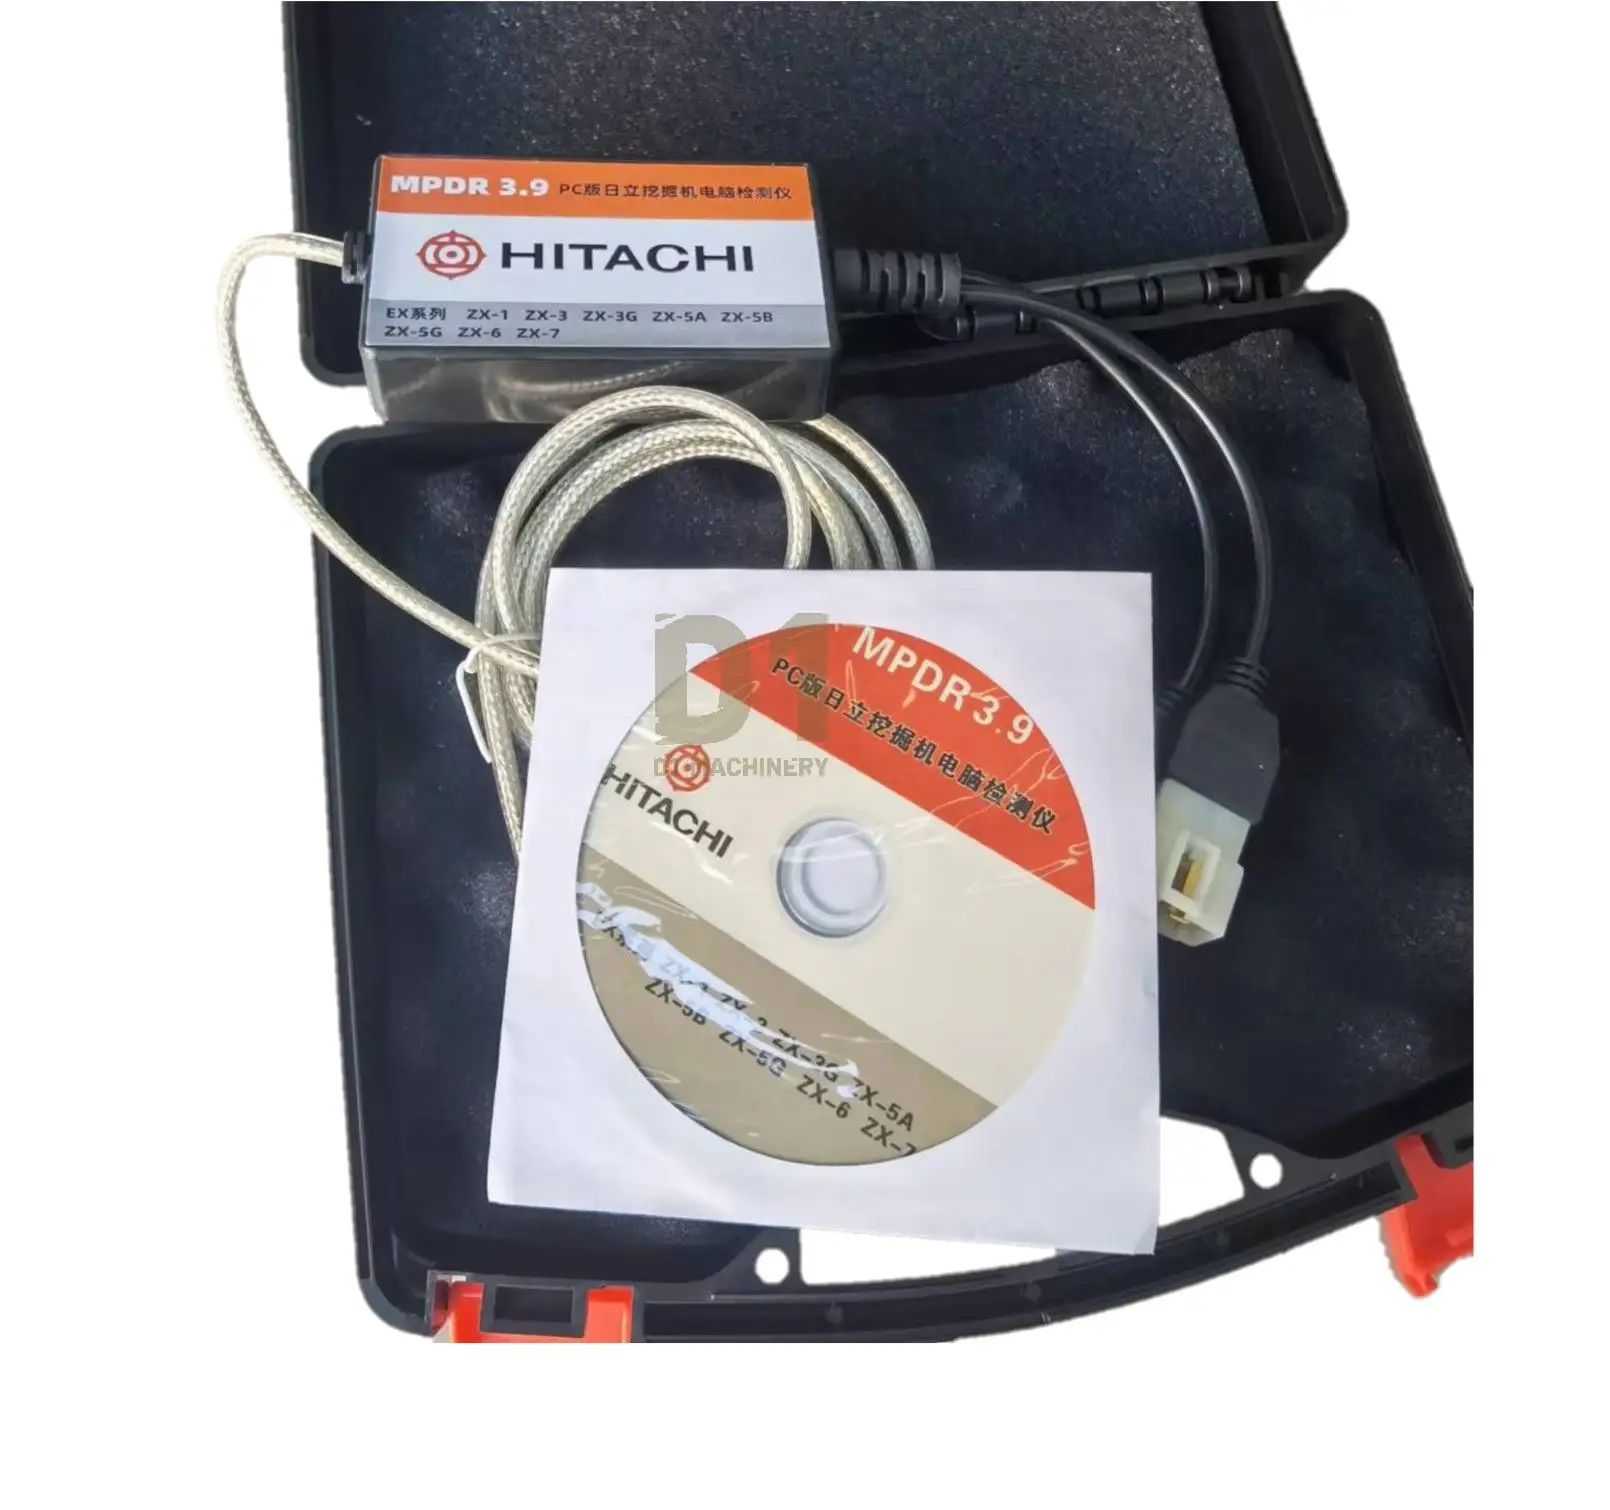 Excavator MPDR3.9 Diagnostic Tool With Software Version 3.9 for ZX-1 ZX-3 ZX-3G ZX-5A Hitachi Excavator DIAGNOSTIC KIT